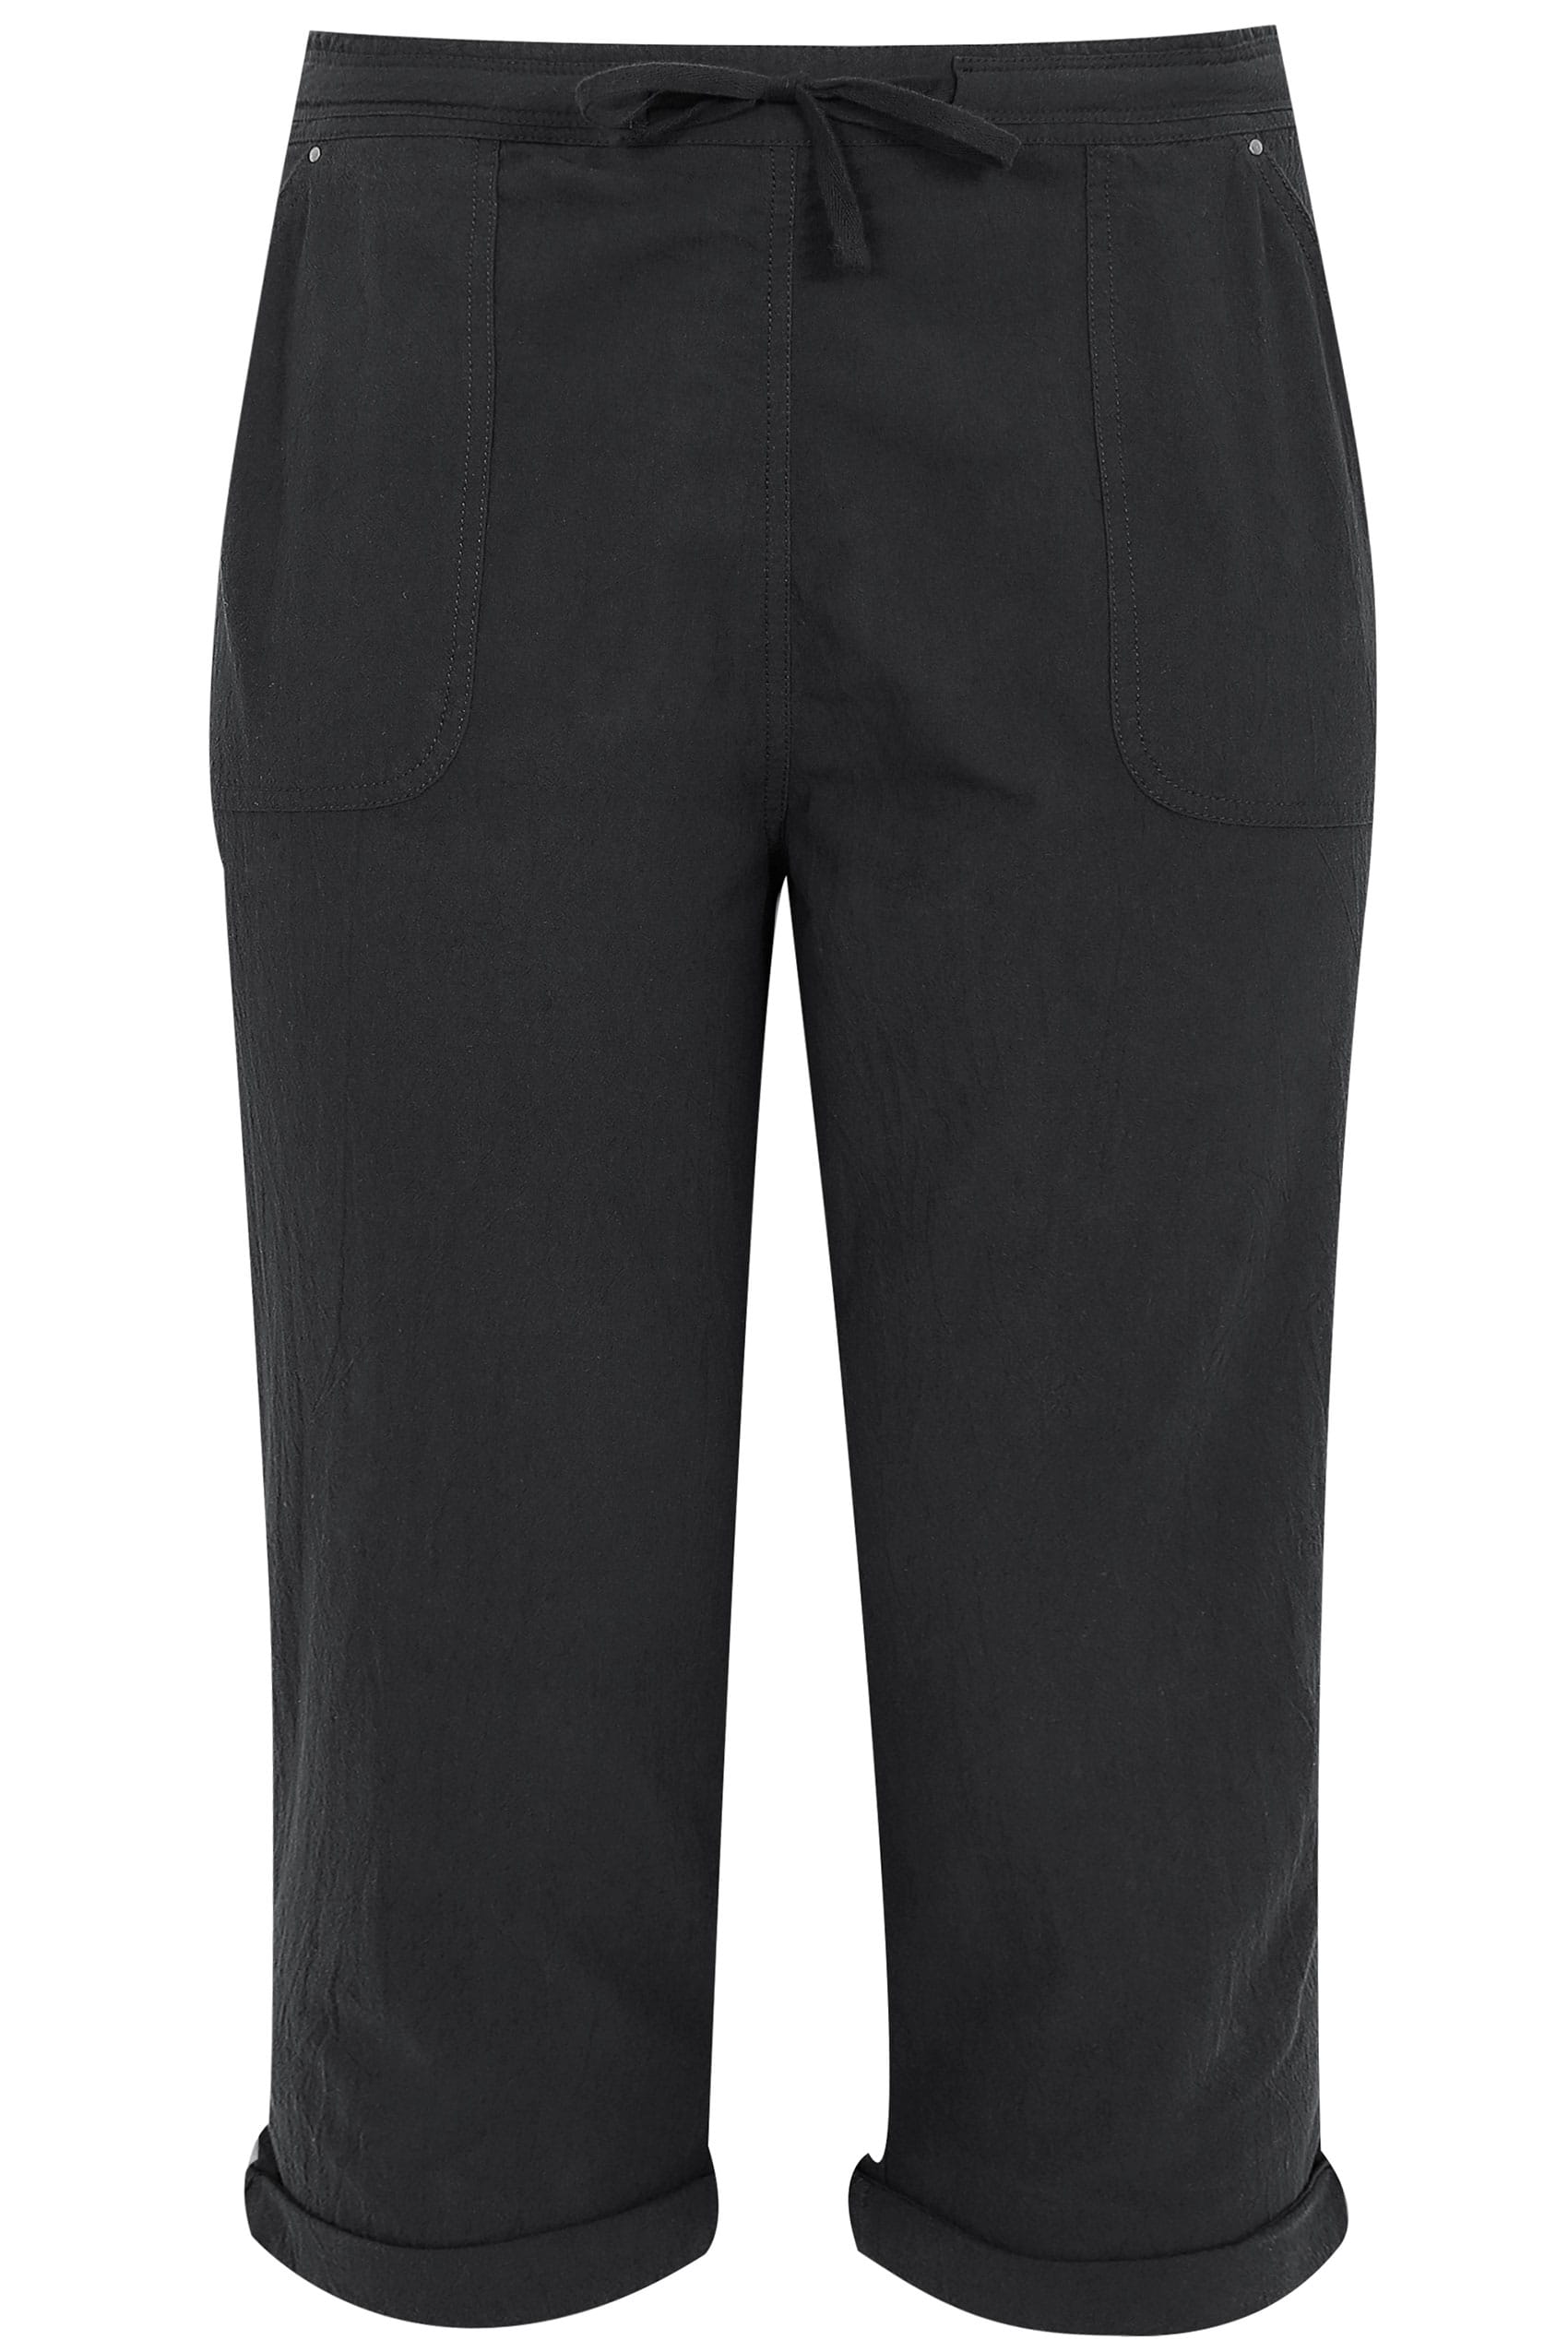 Black Cool Cotton Cropped Trousers, plus size 16 to 36